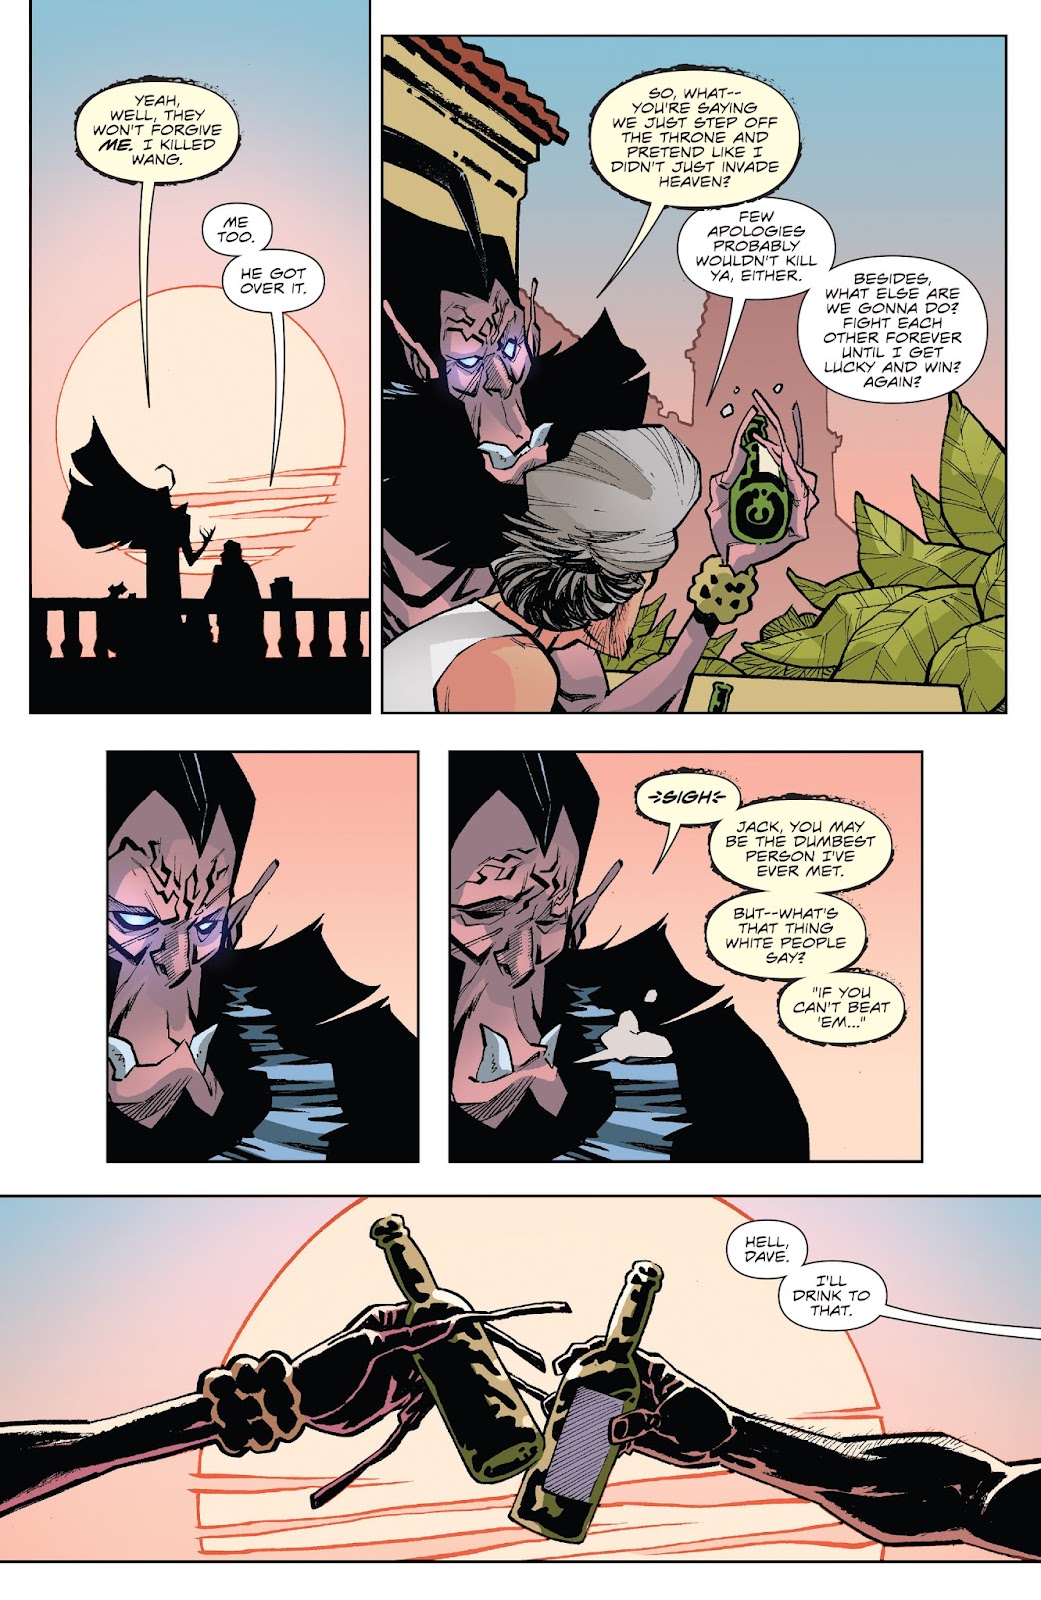 Big Trouble in Little China: Old Man Jack issue 12 - Page 17